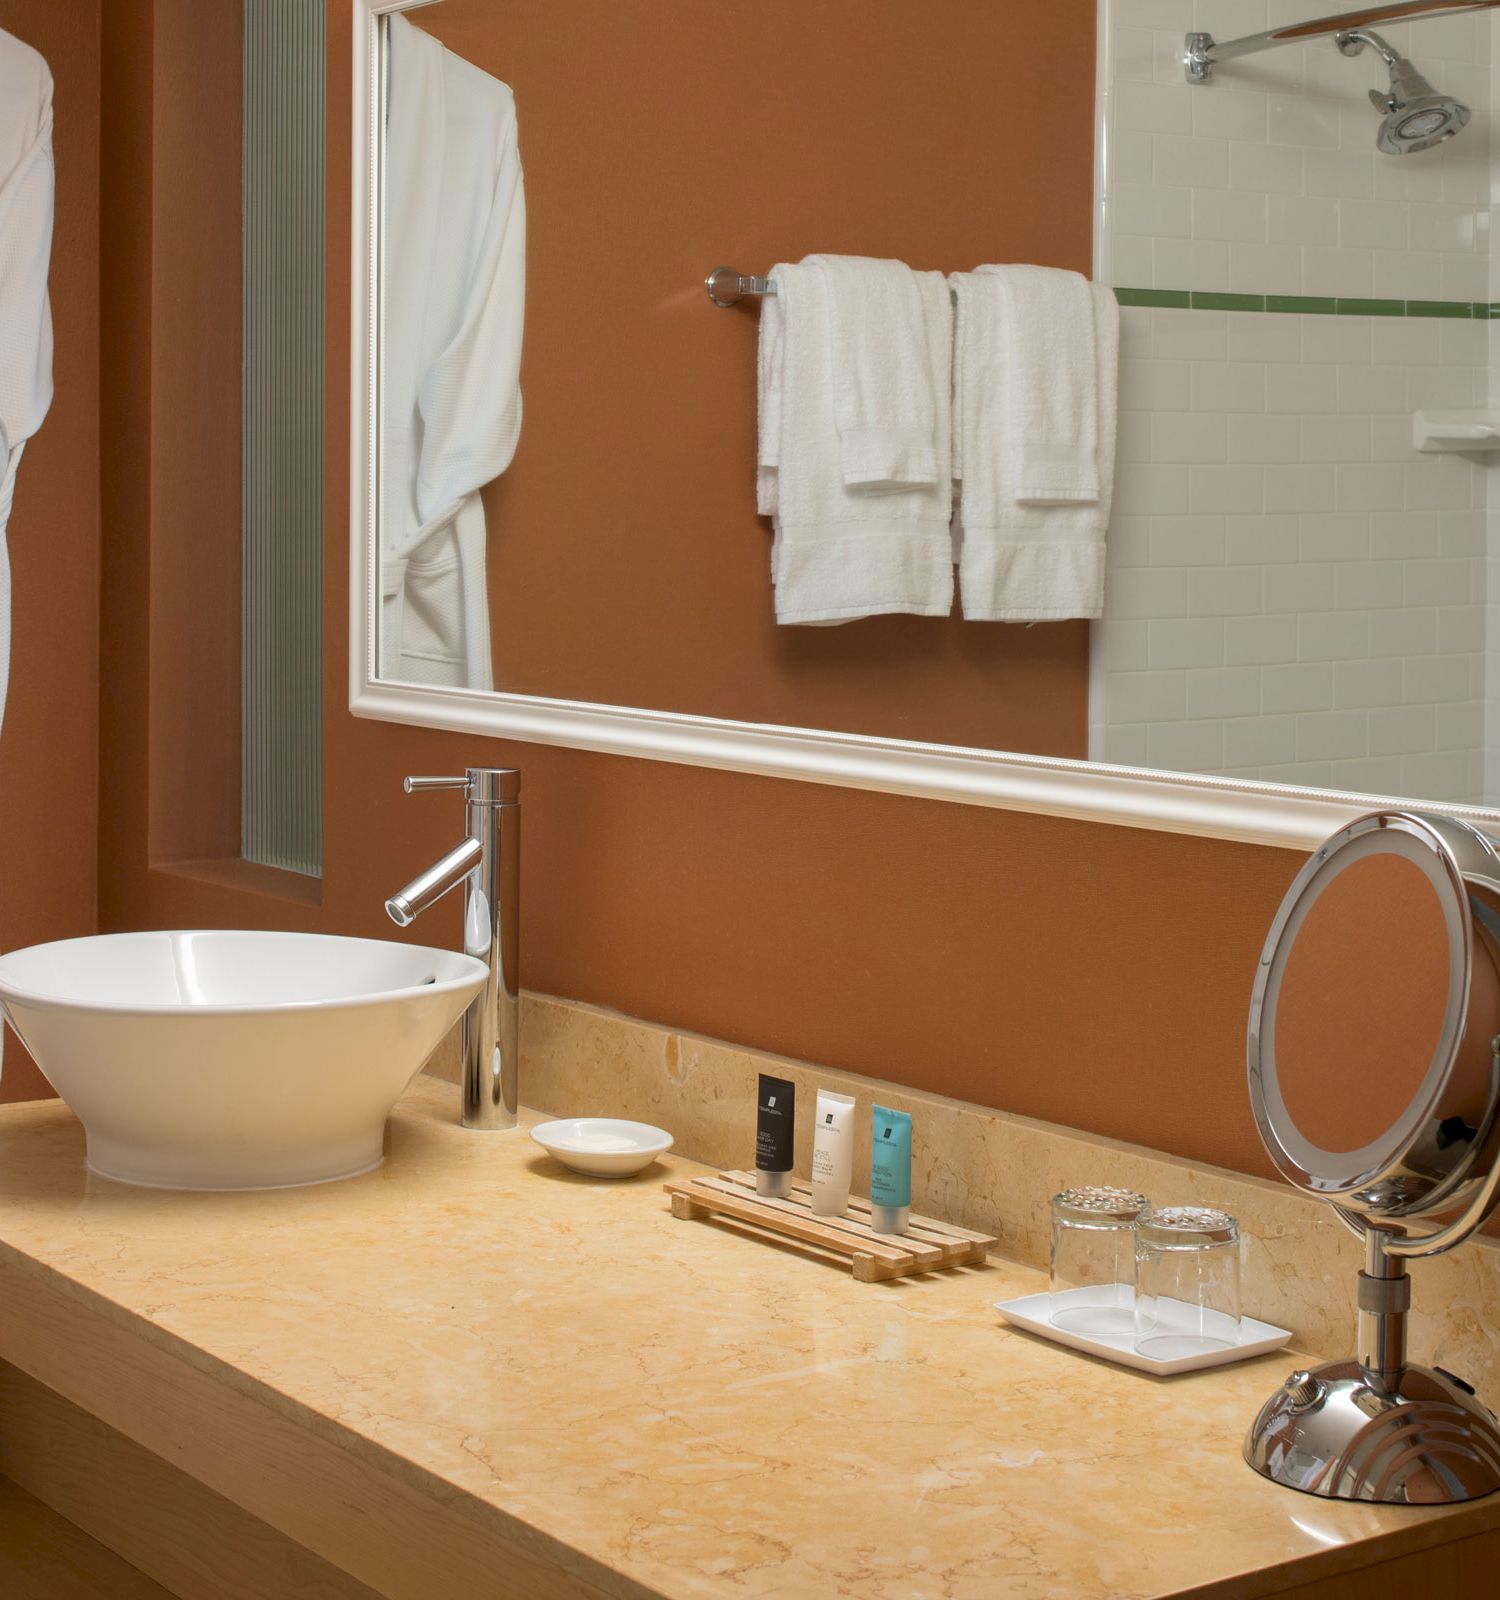 A bathroom with a countertop sink, a vanity mirror, toiletries, a bathrobe on a hook, two towels on a rack, and a shower visible in the background.